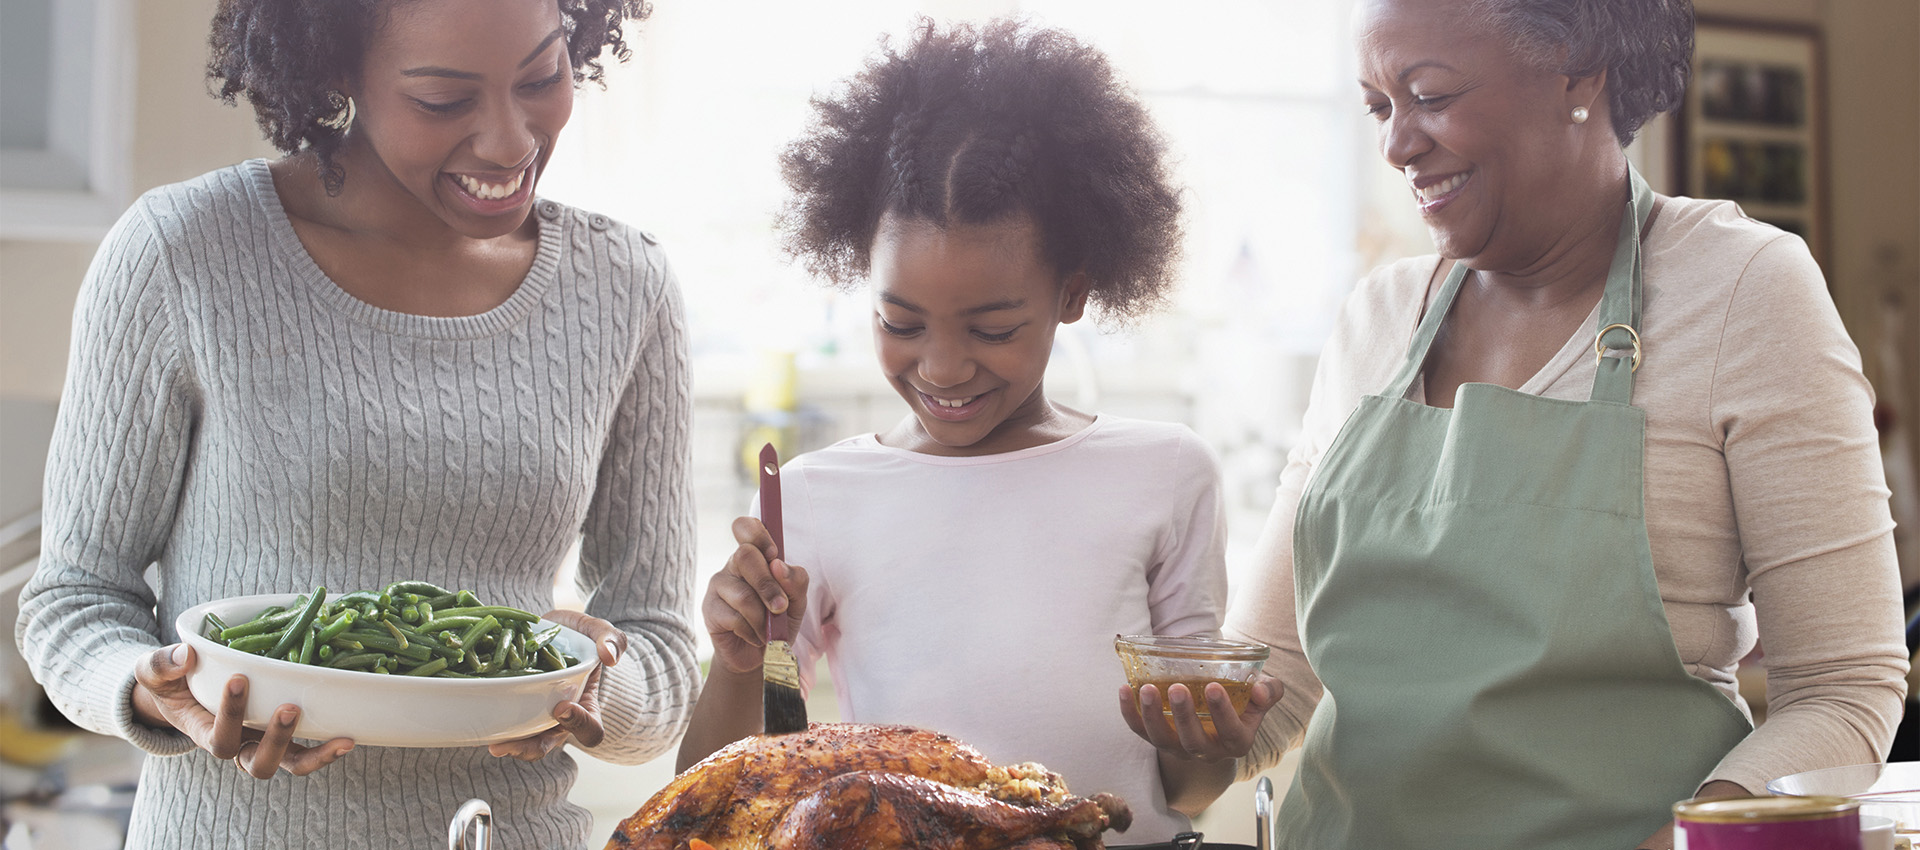 Family cooking thanksgiving dinner together image